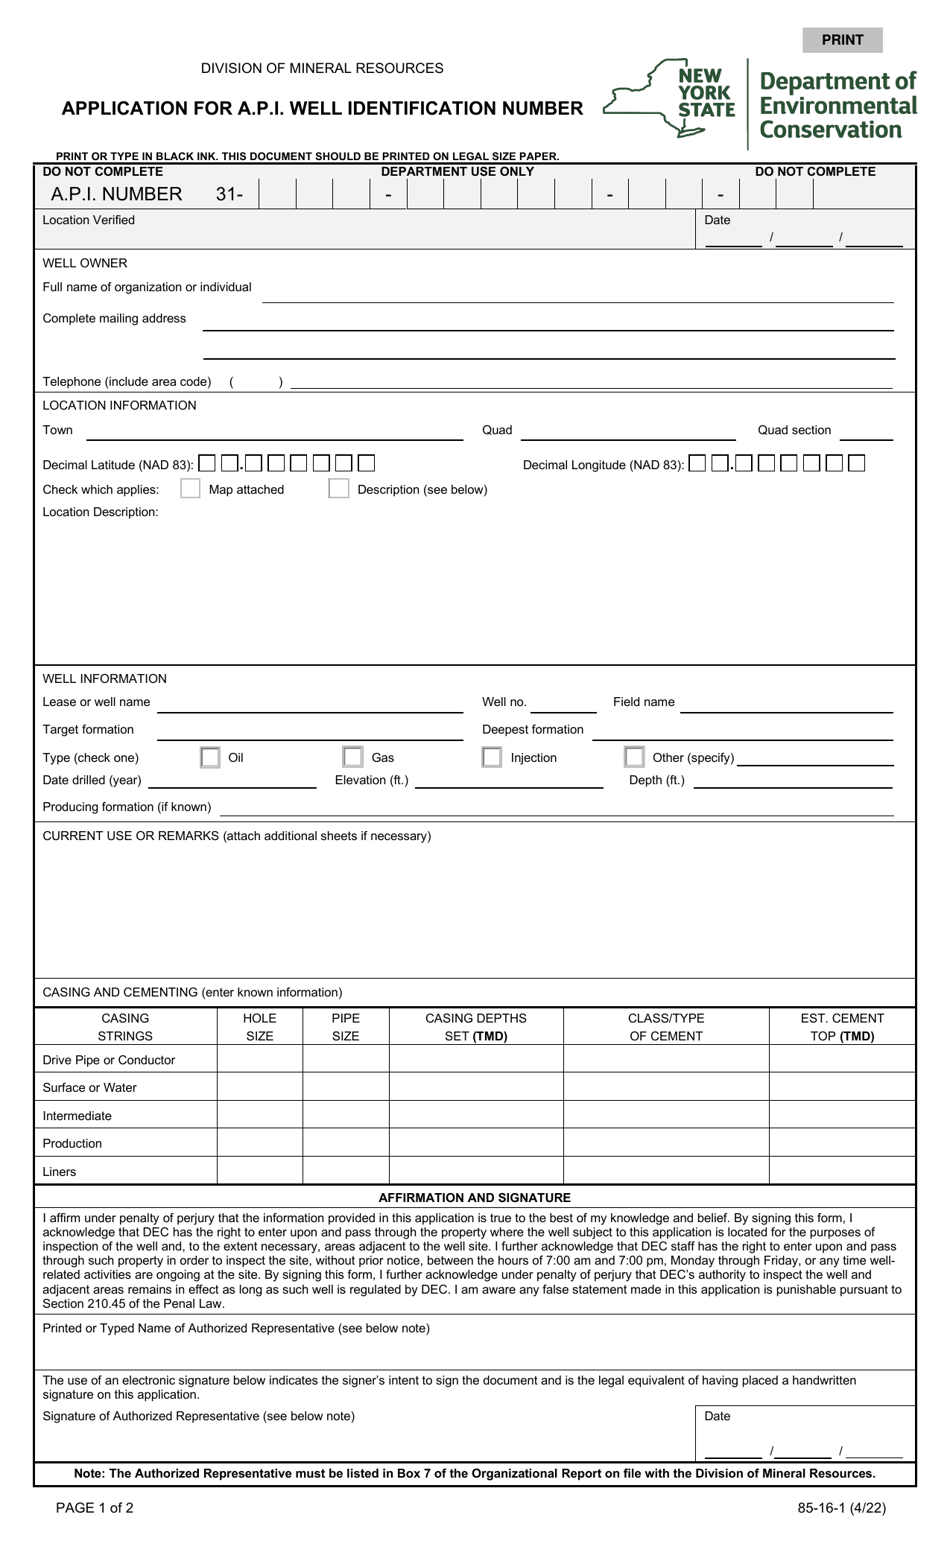 Form 85-16-1 Application for a.p.i. Well Identification Number - New York, Page 1